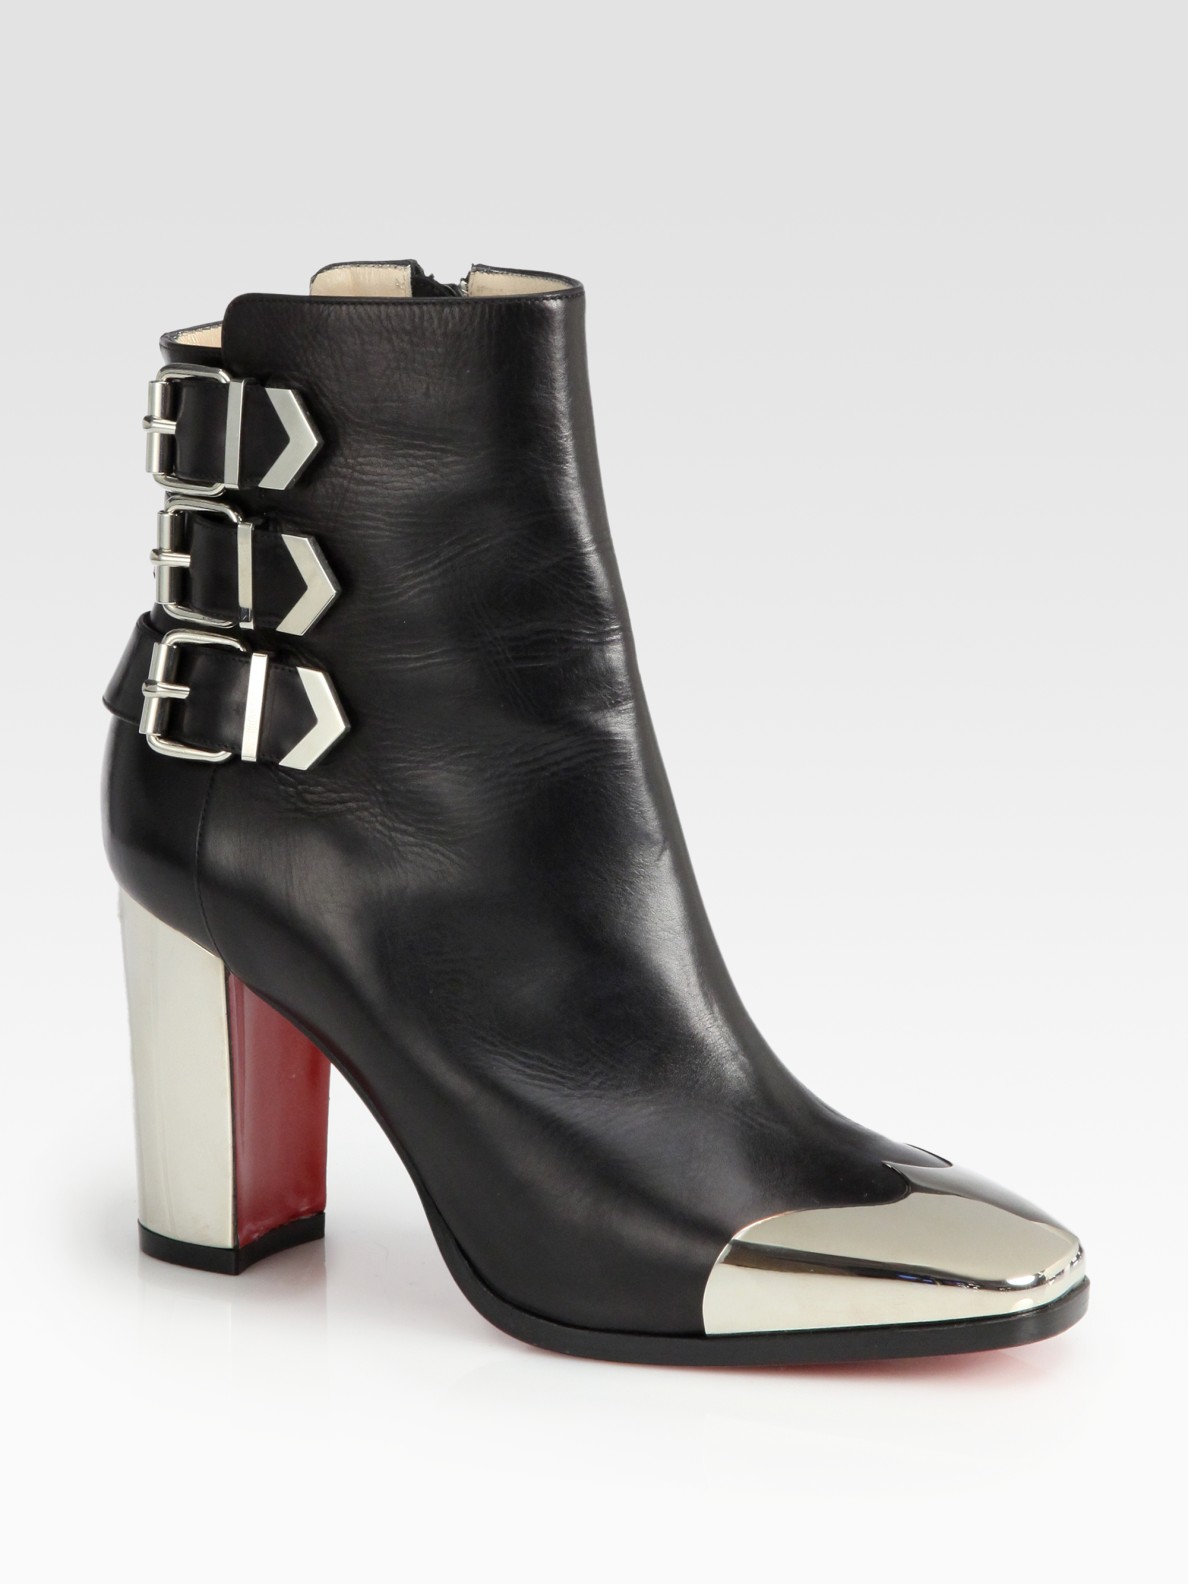 Christian louboutin Chelita Leather Metal Wingtip Ankle Boots in ...